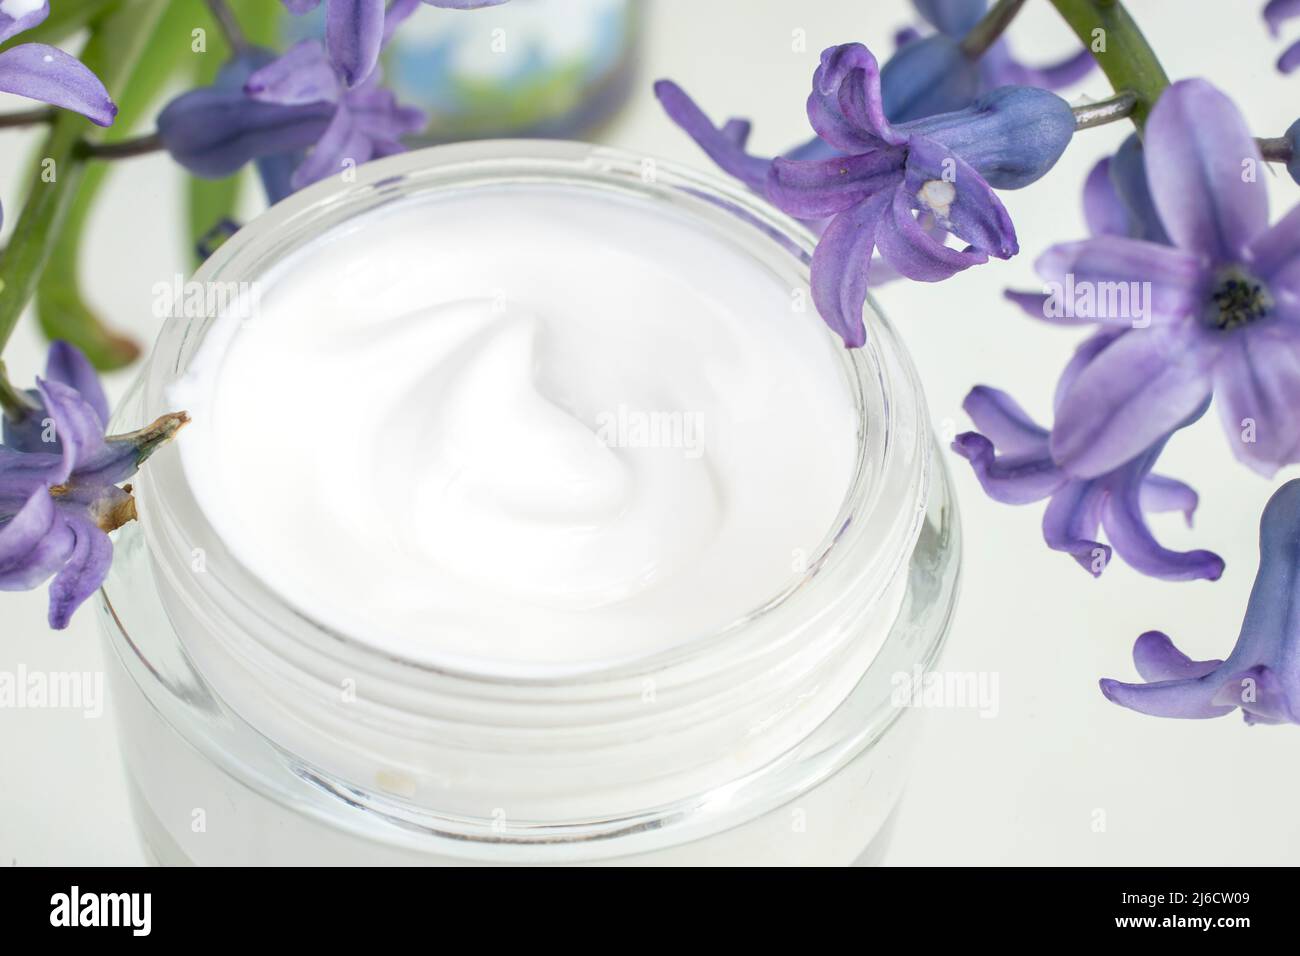 Cosmetic cream texture in a glass jar, next to hyacinthus purple flowers Stock Photo